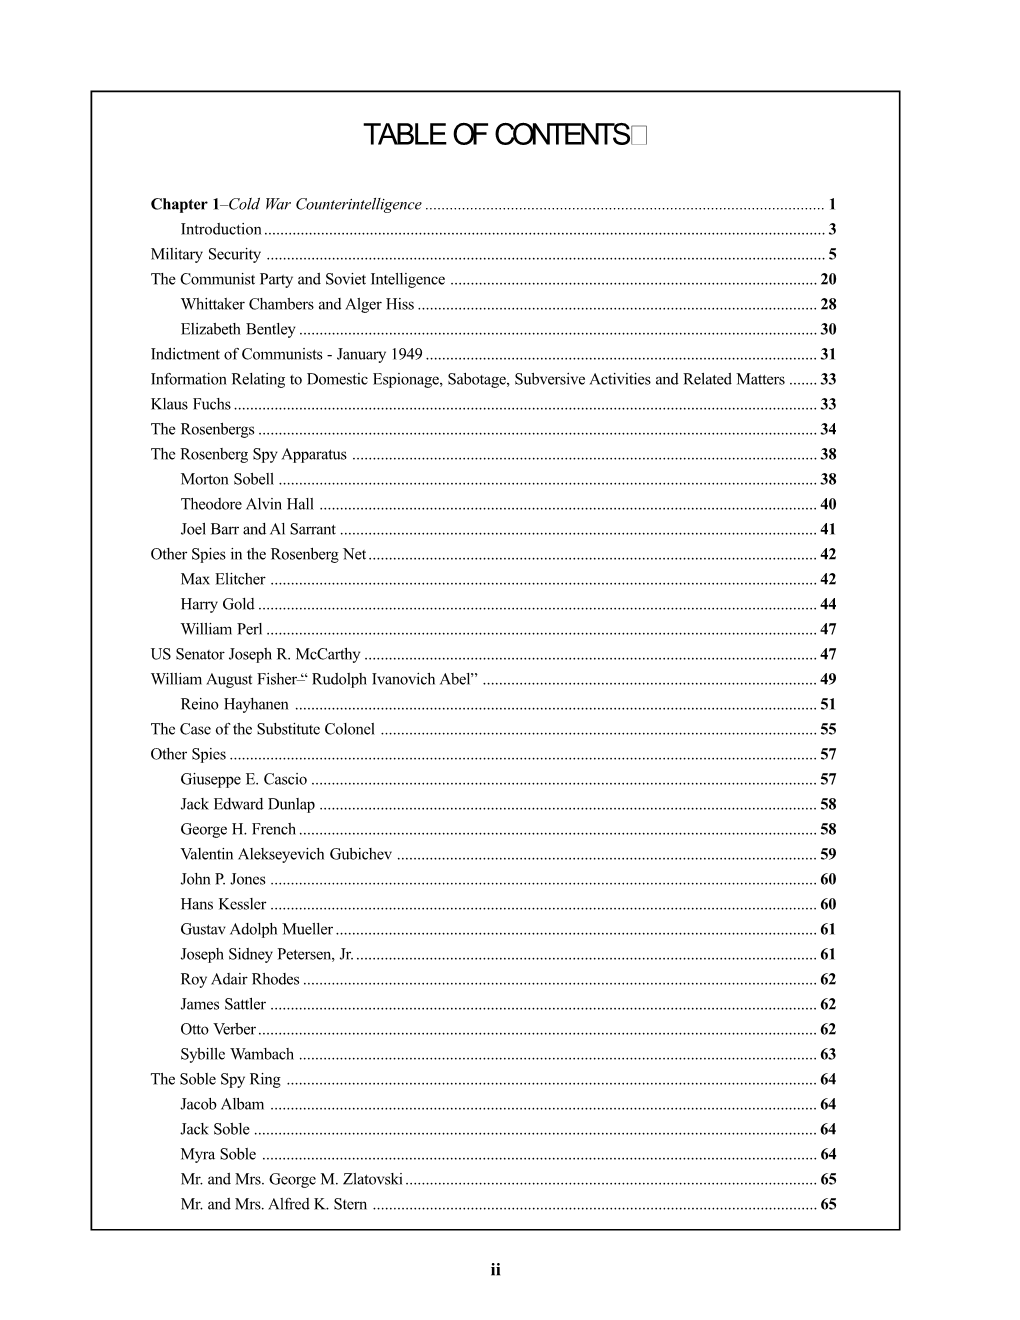 Volume 3 Table of Contents